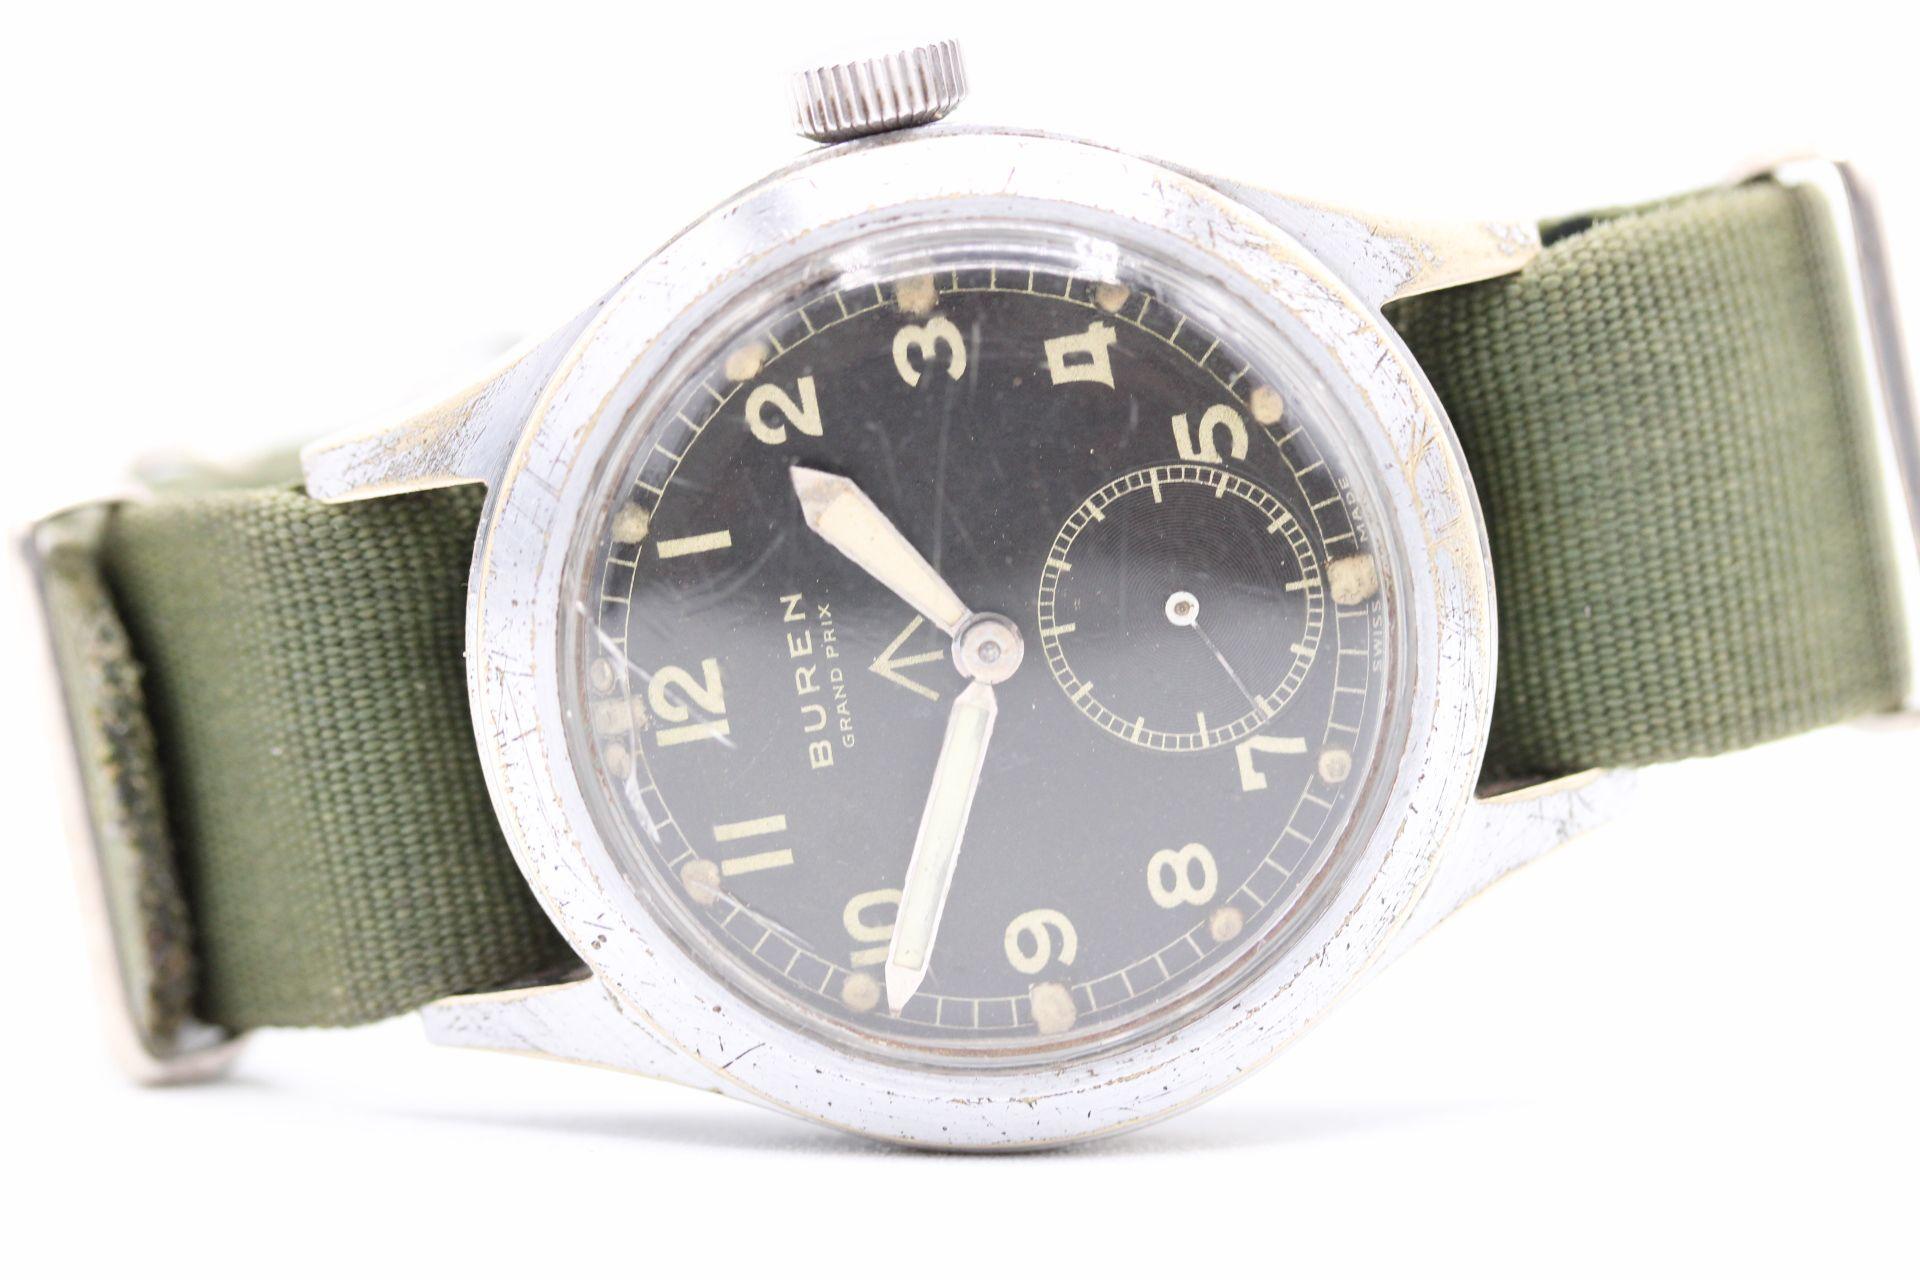 A really good honest, original version of one of the so called ‘Dirty Dozen’ watches of British World War 2 Military watches. It shows it marks, scratches, wear and tear but then again this is a Military watch that has seen service over 70 years